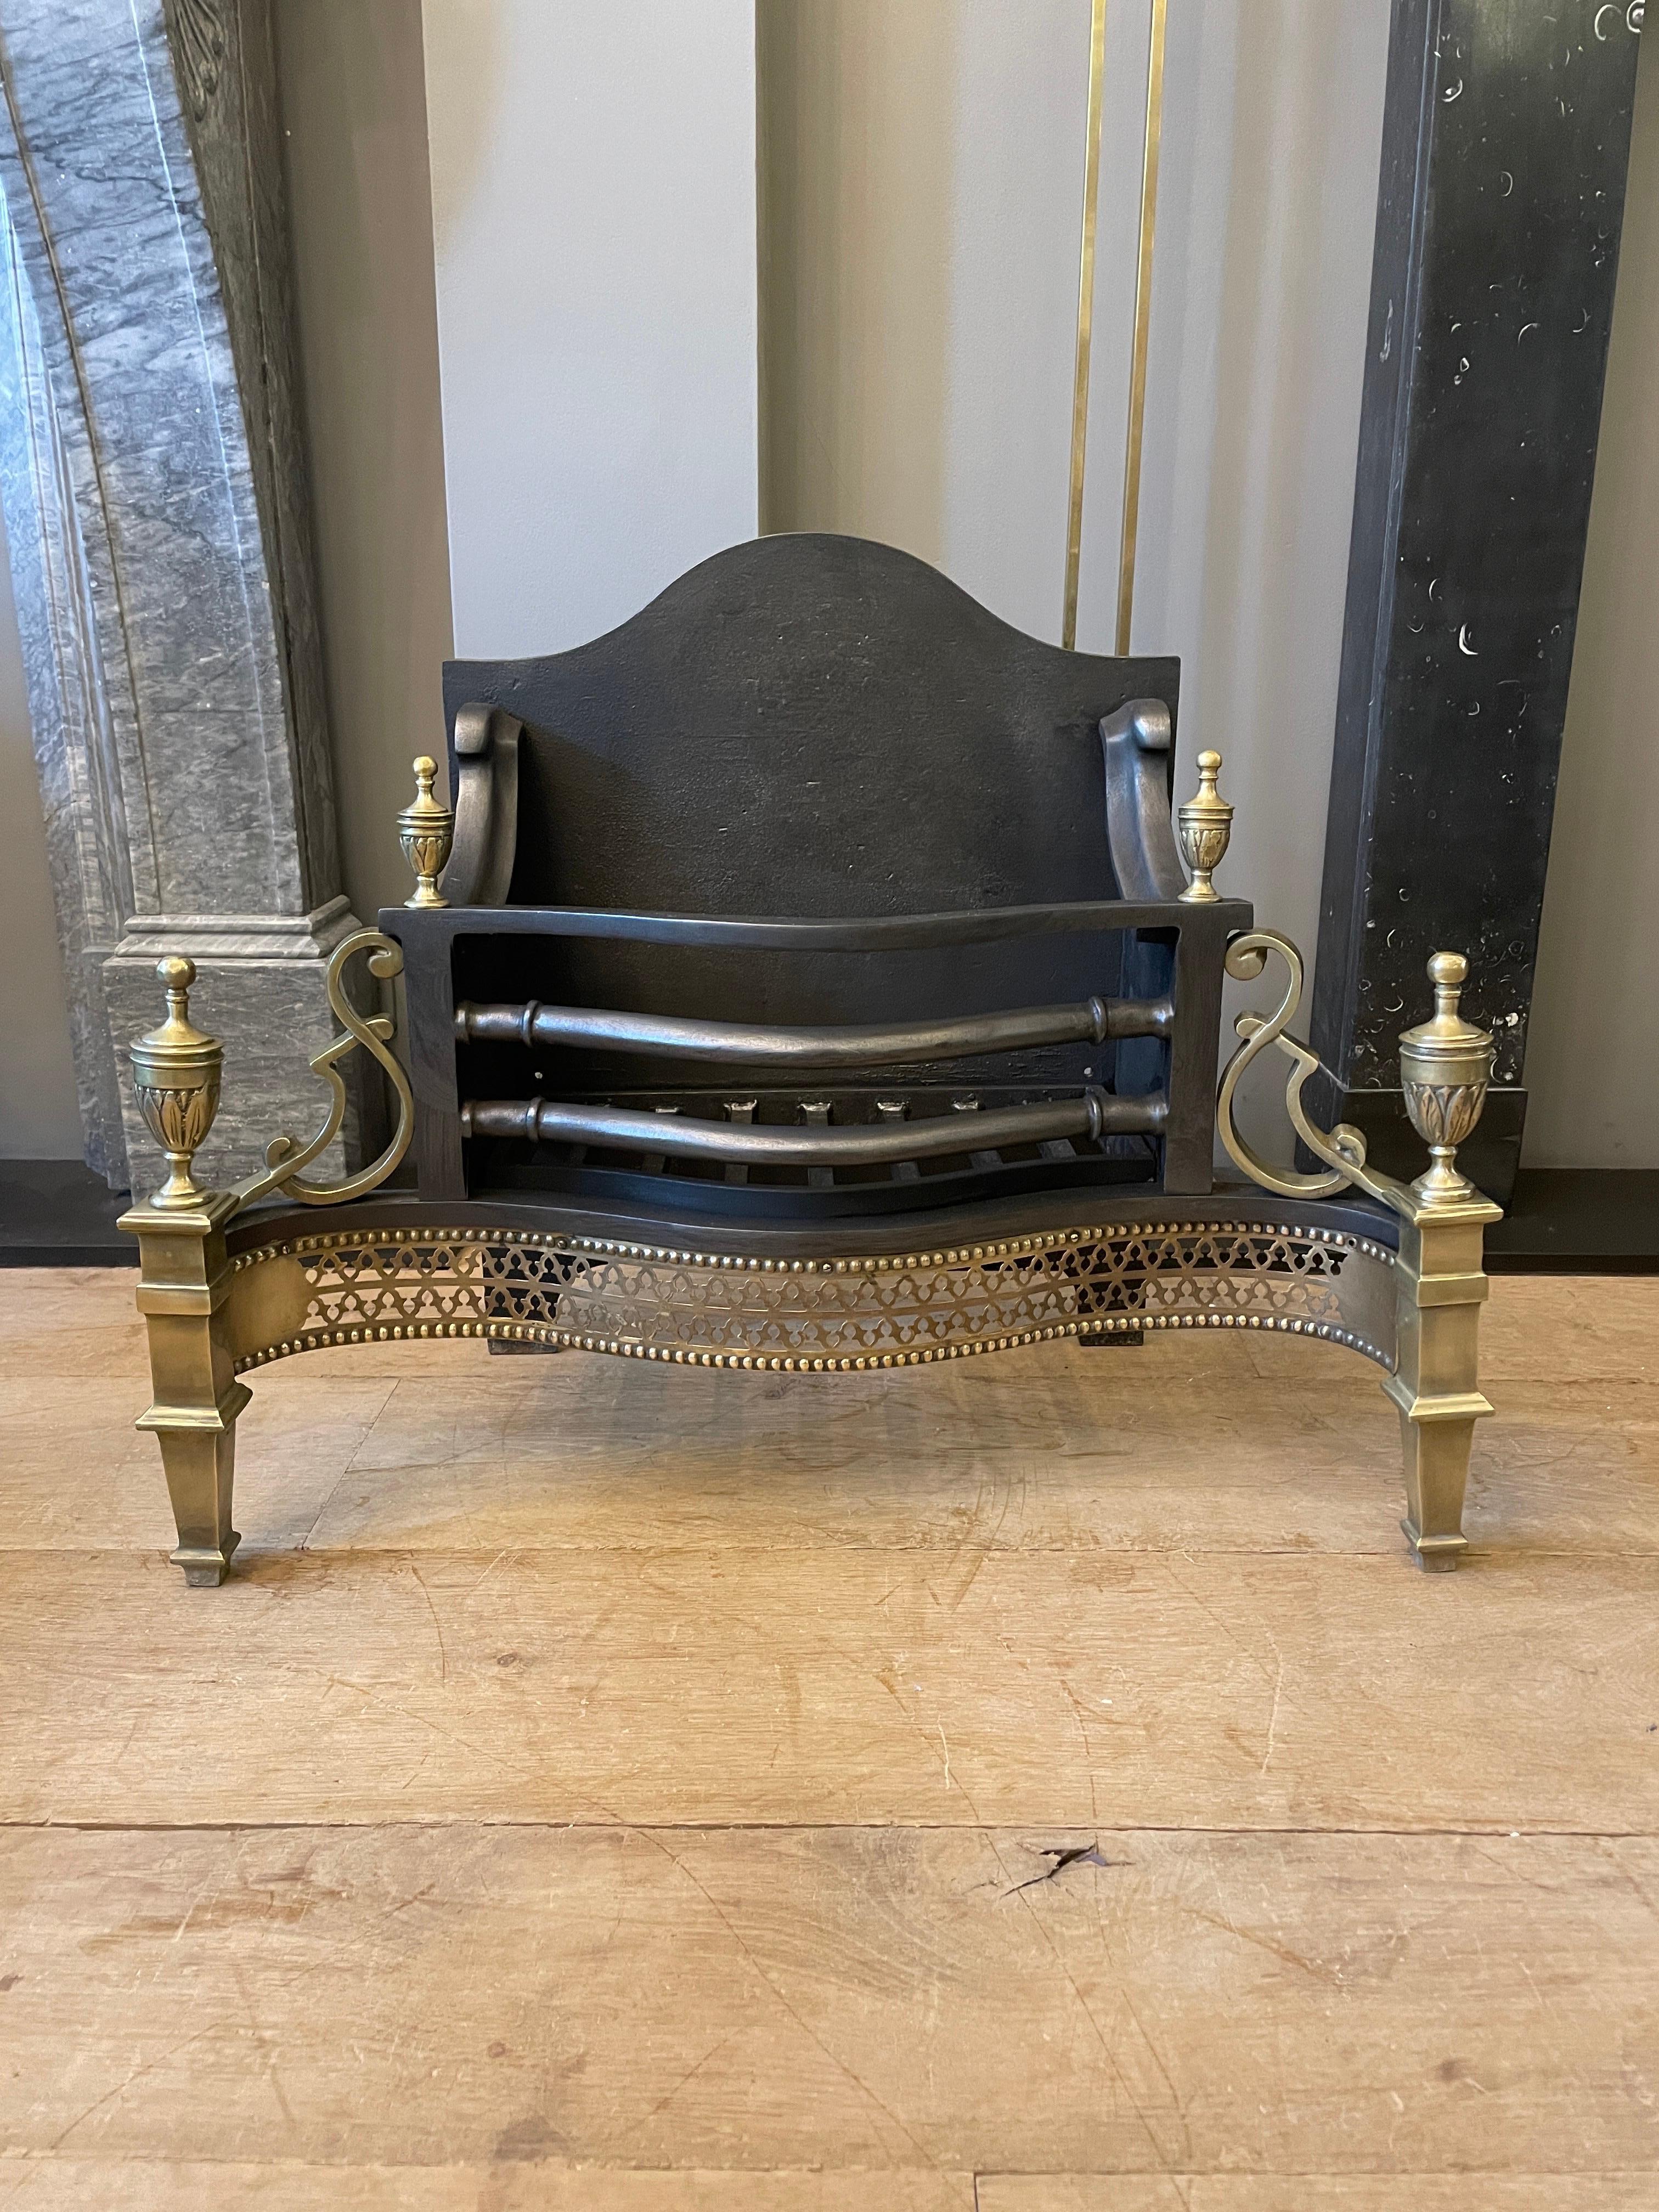 A good quality English brass and steel fire grate. The pierced brass fret surmounted by shaped burning area which is flanked by brass scroll work. The legs surmounted by decorative brass finials. Shaped cast iron back behind. 20th century.